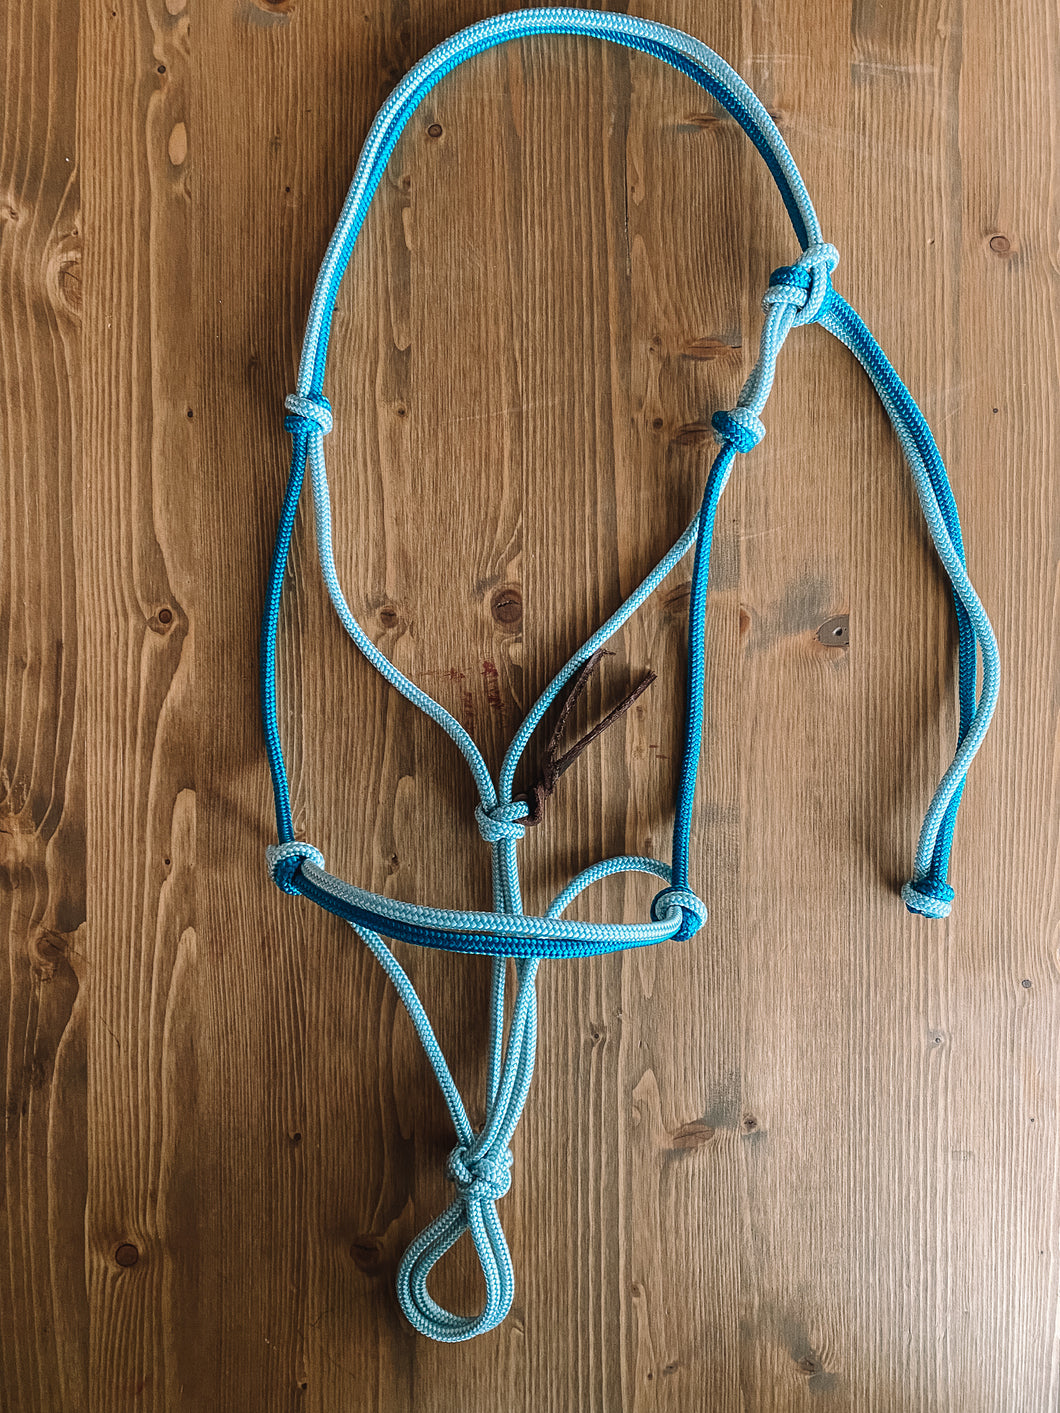 Two-Toned Rope Halter